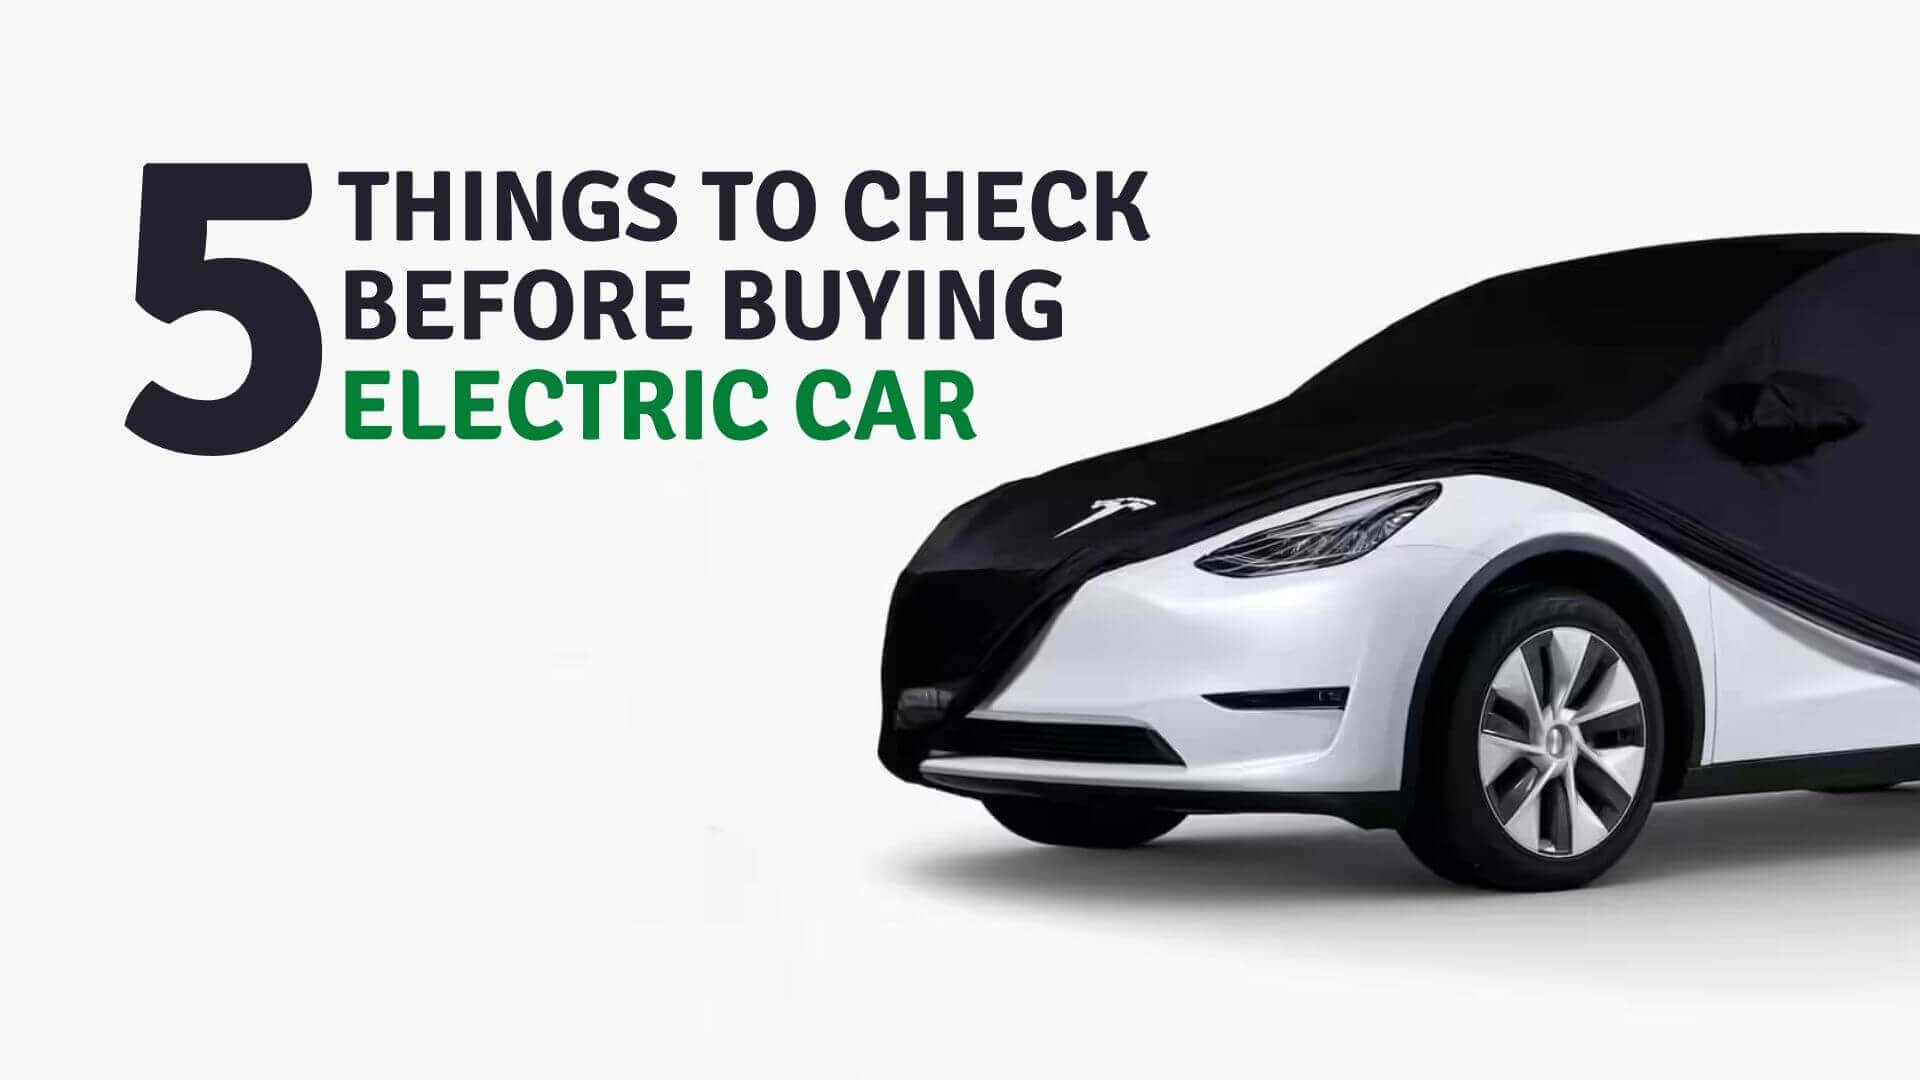 https://e-vehicleinfo.com/things-to-check-before-buying-an-electric-car/